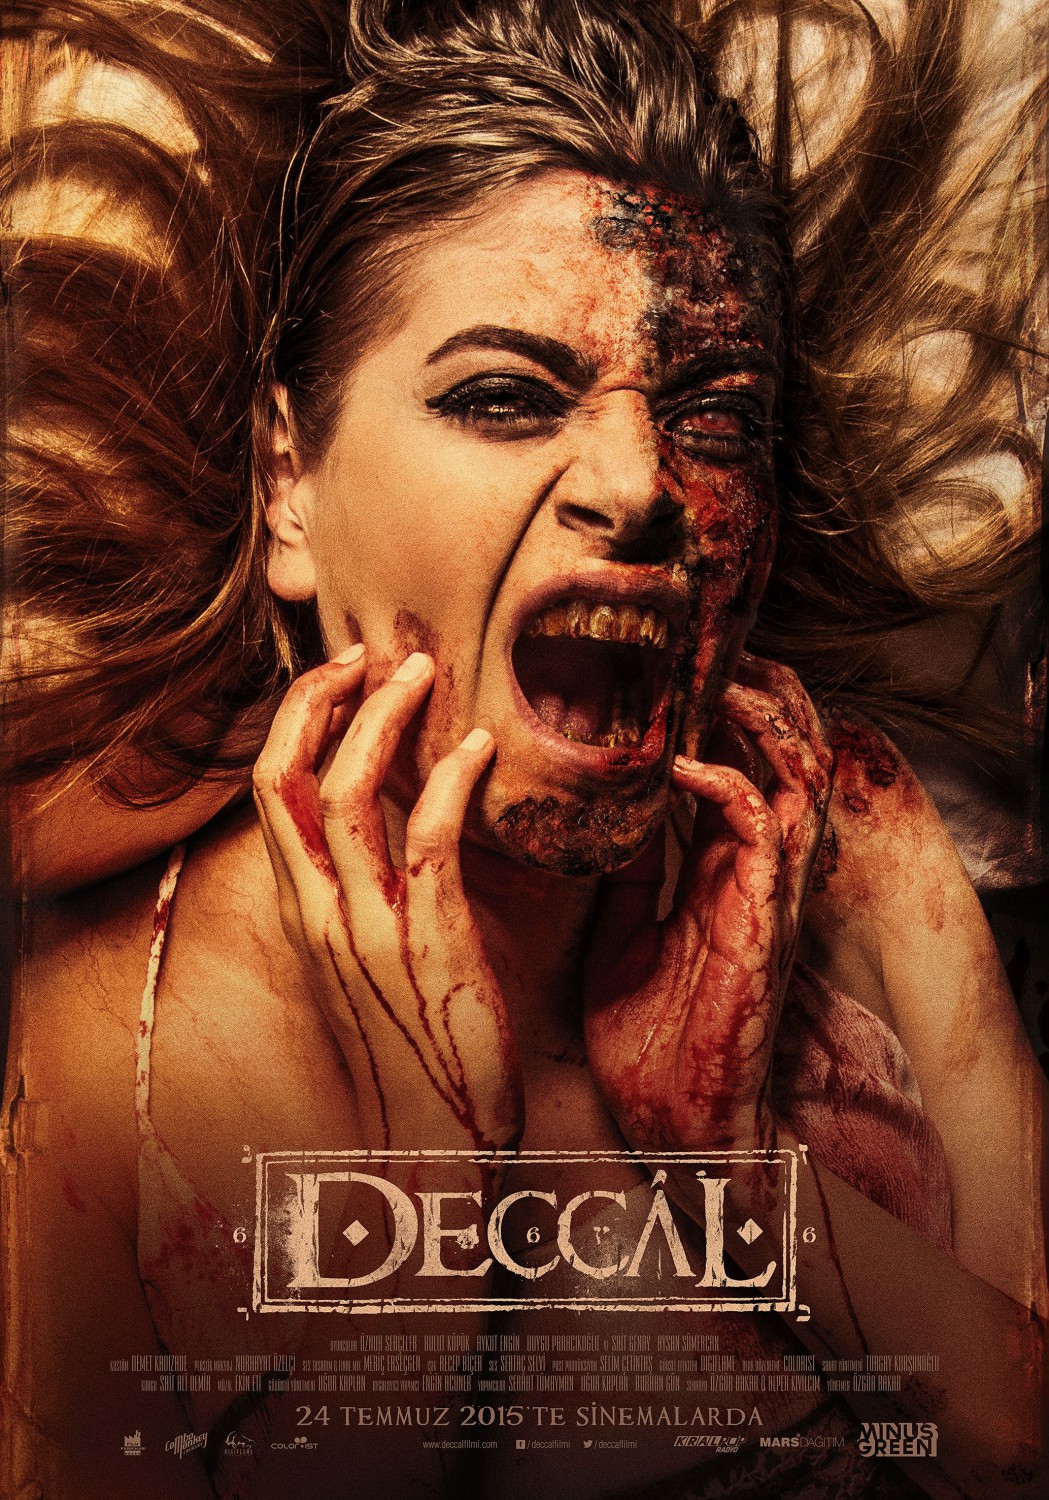 Extra Large Movie Poster Image for Deccal (#4 of 8)